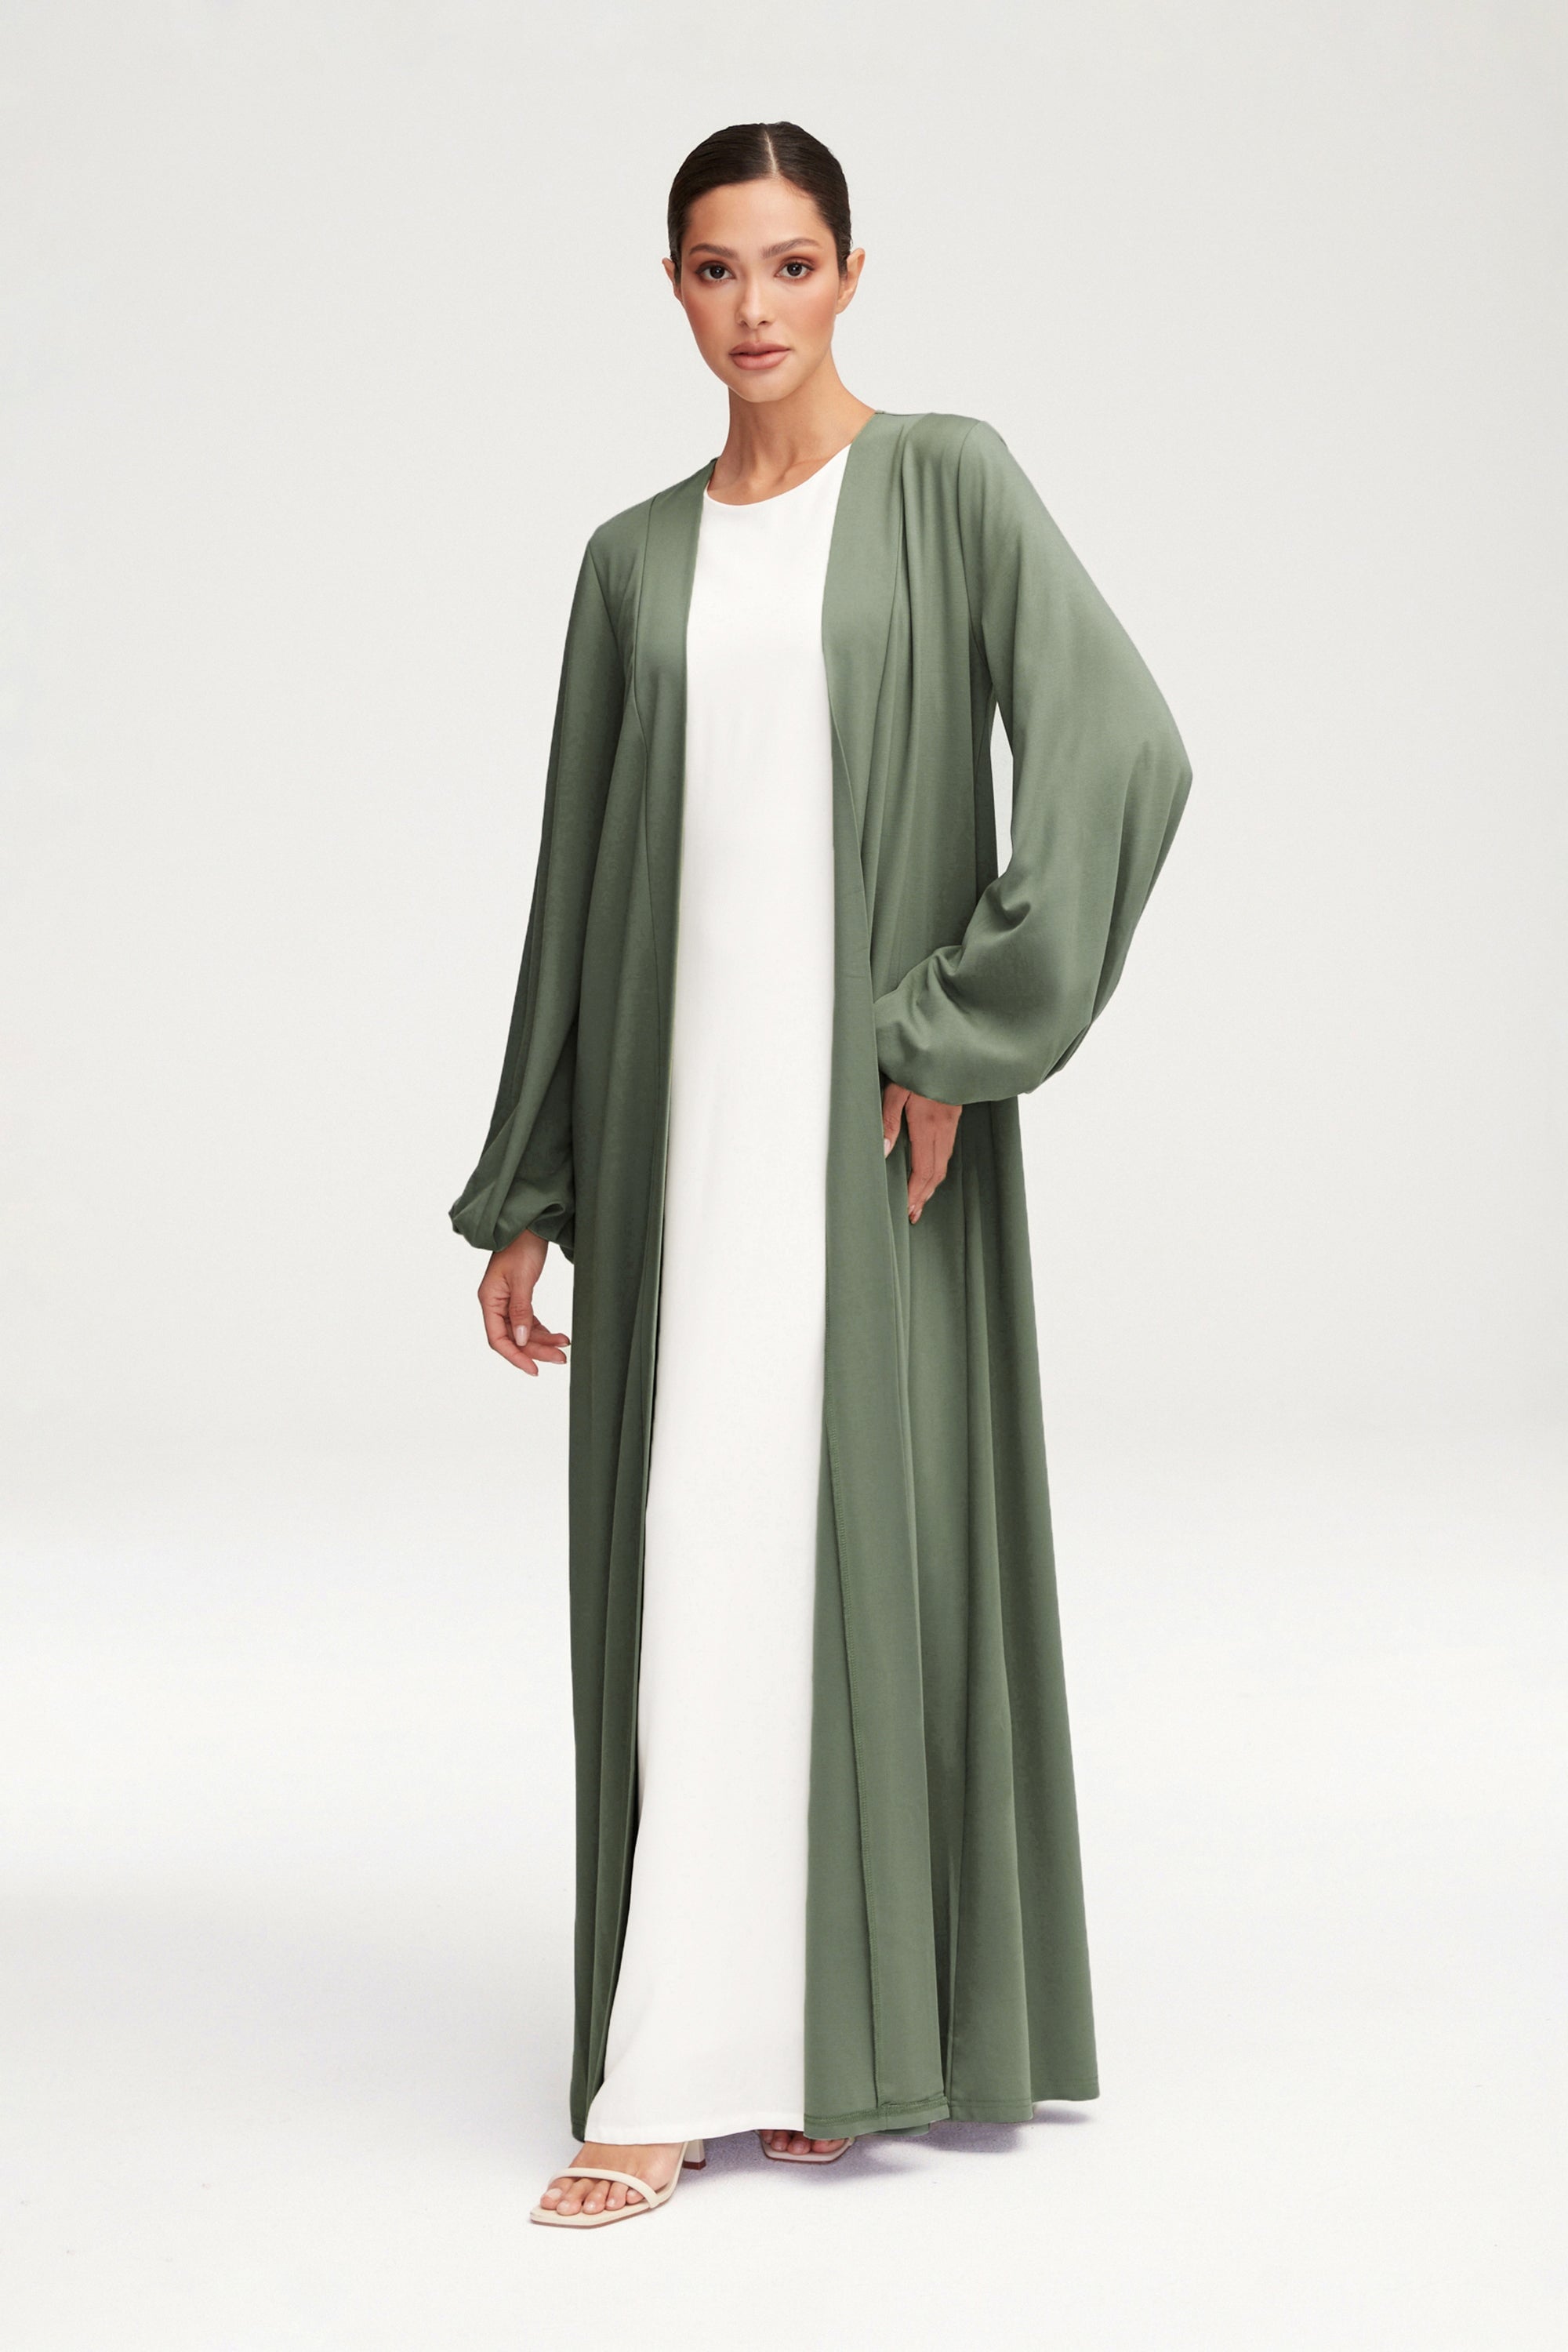 Essential Jersey Open Abaya - Sage Clothing Veiled 